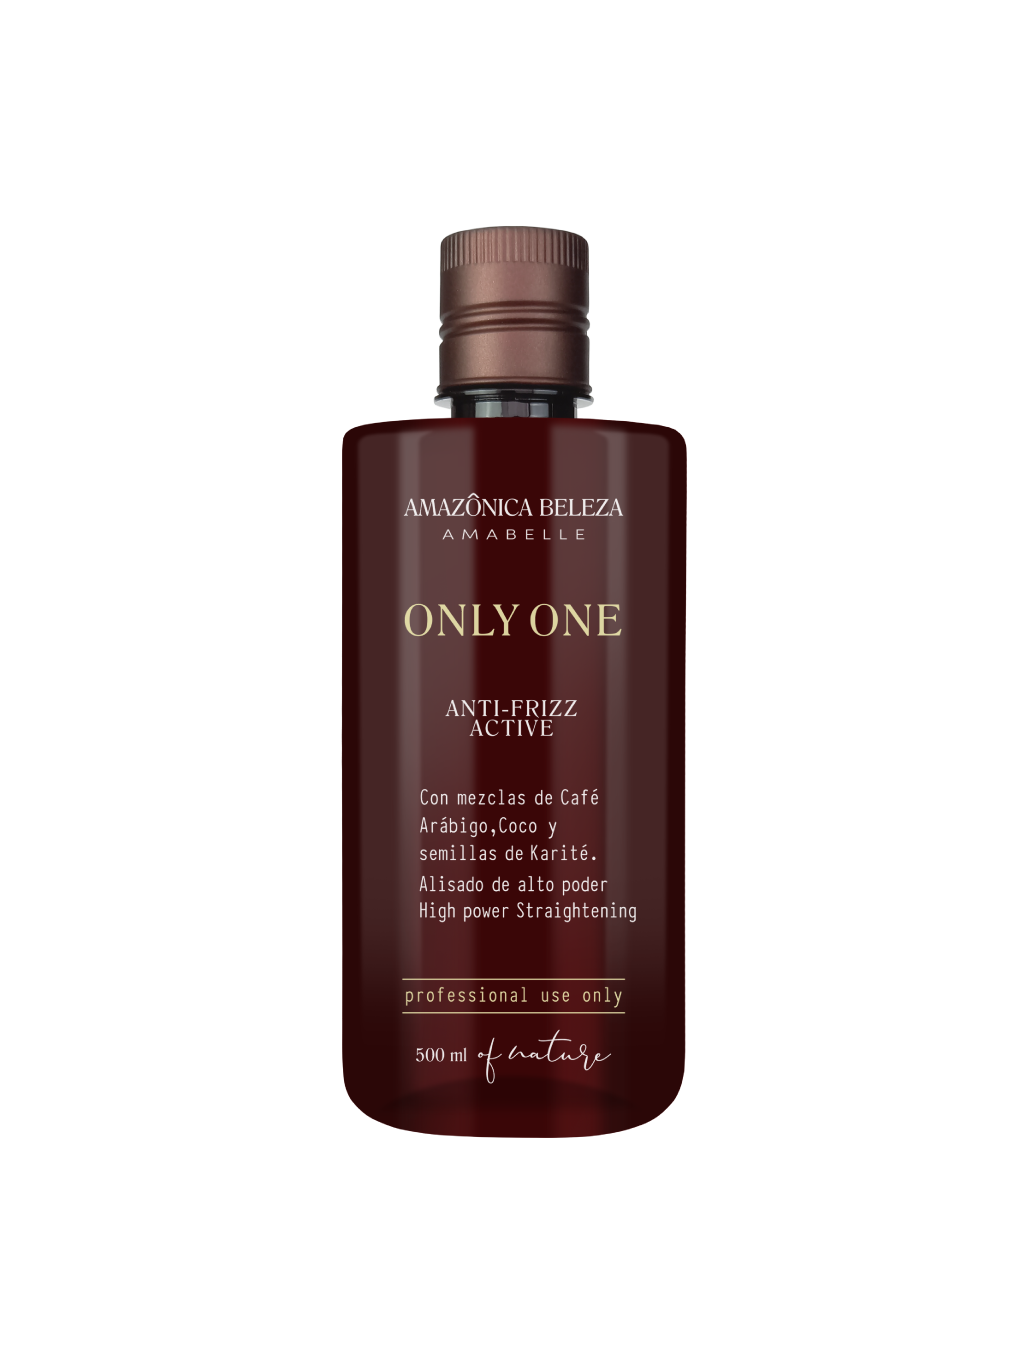 Only One, a Single Step Hair Smoothing Treatment